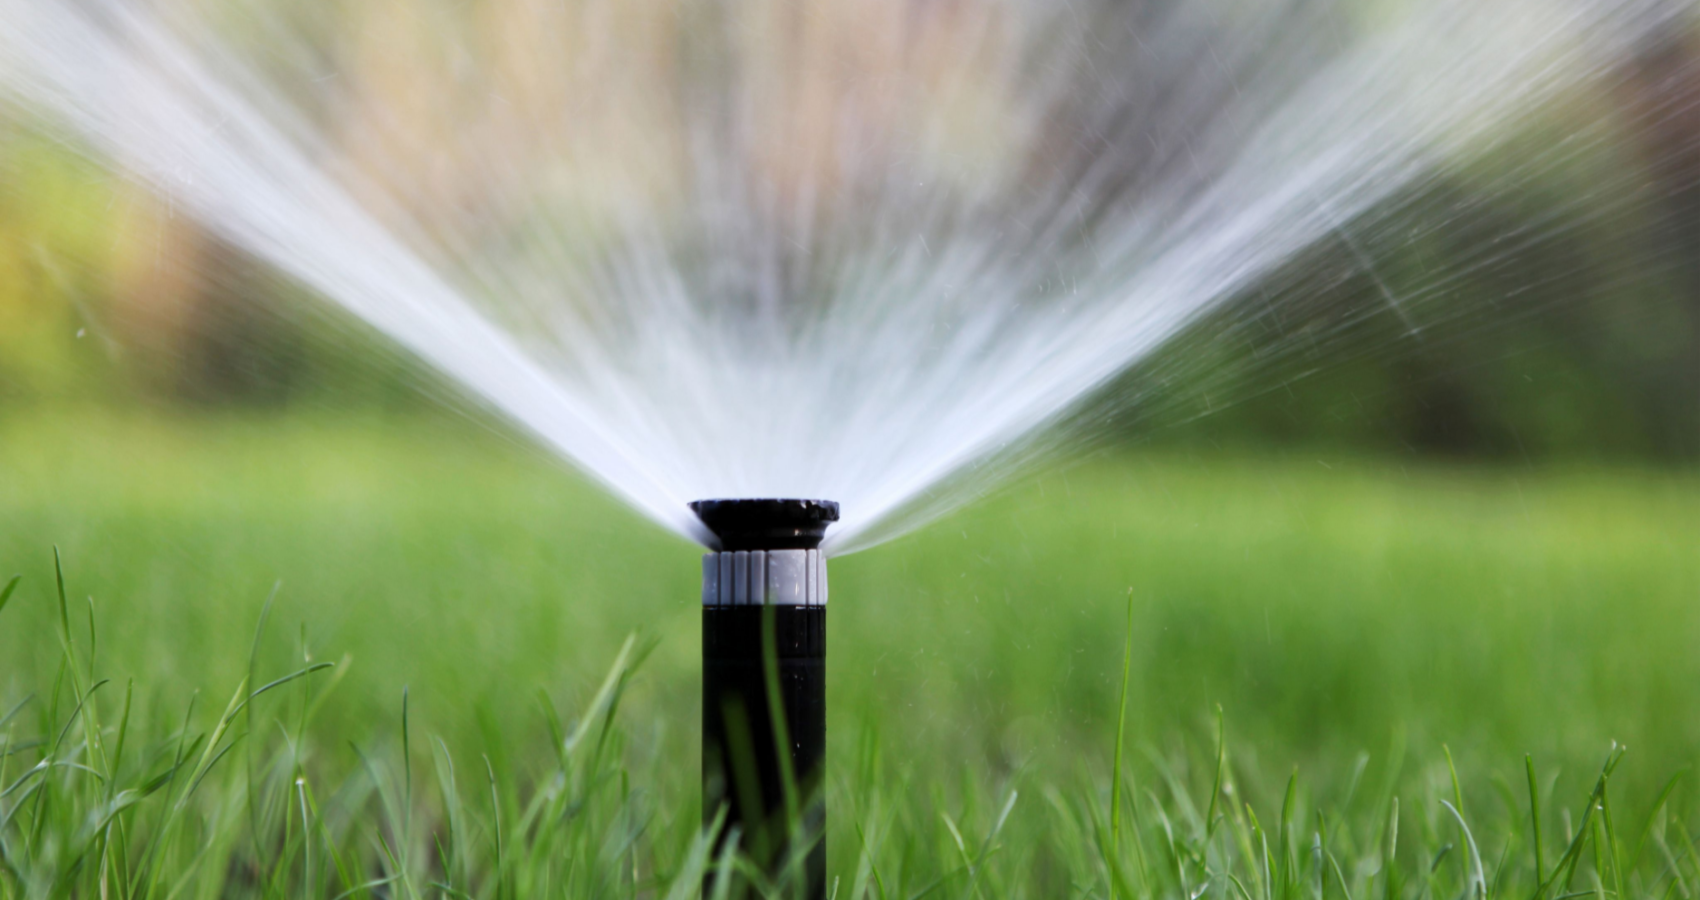 Sprinkler System Installation Des Peres, MO | Lawn Care for Des Peres, MO Area | Lawn Sprinklers of St. Louis